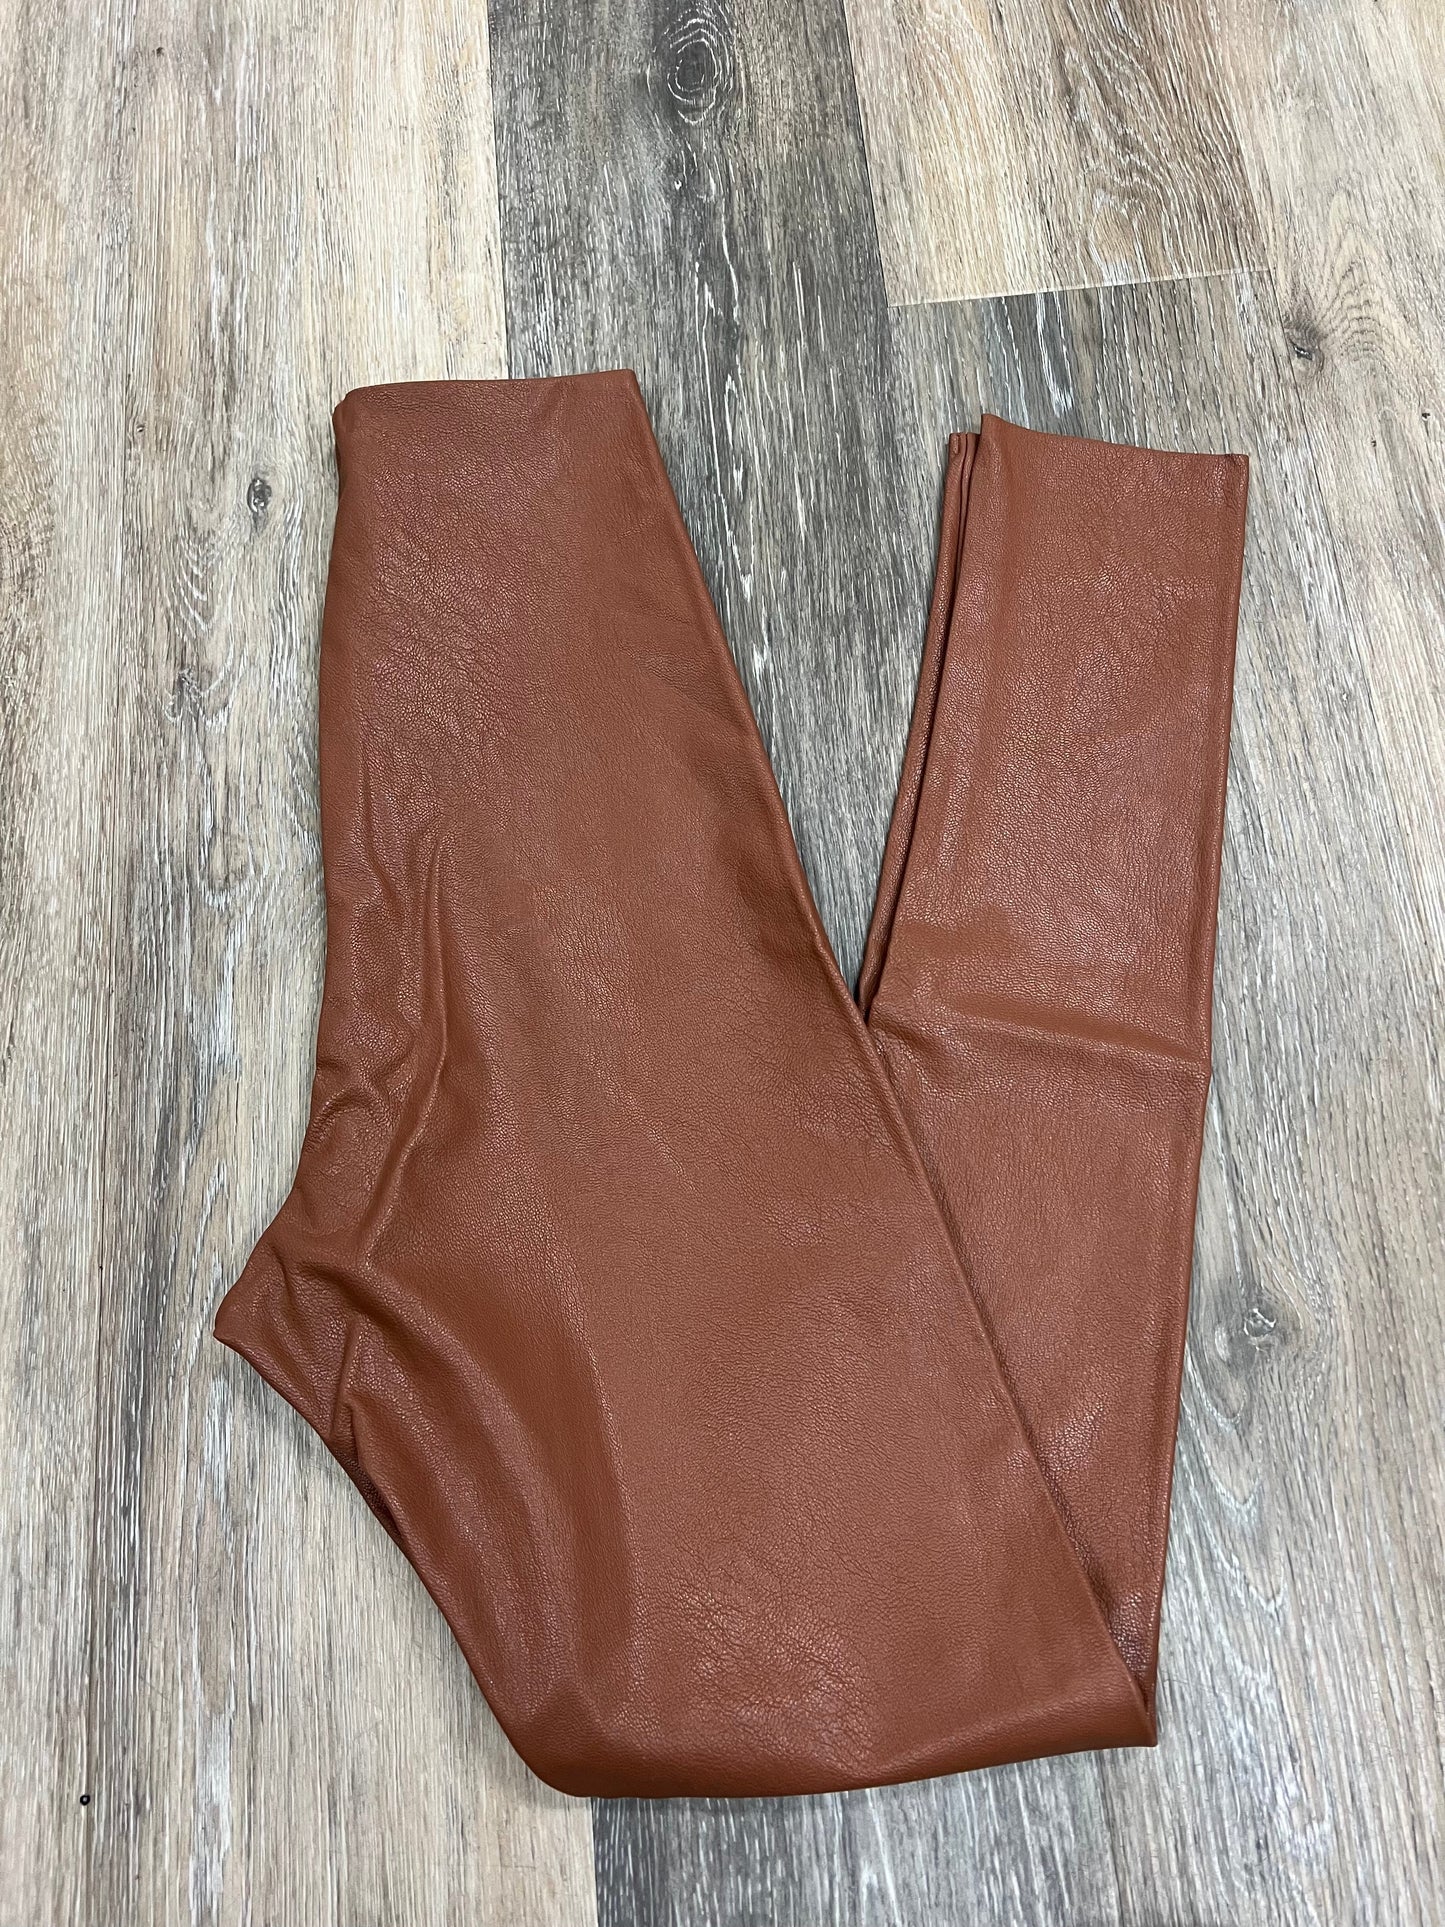 Faux Leather Leggings By Commando  Size: S